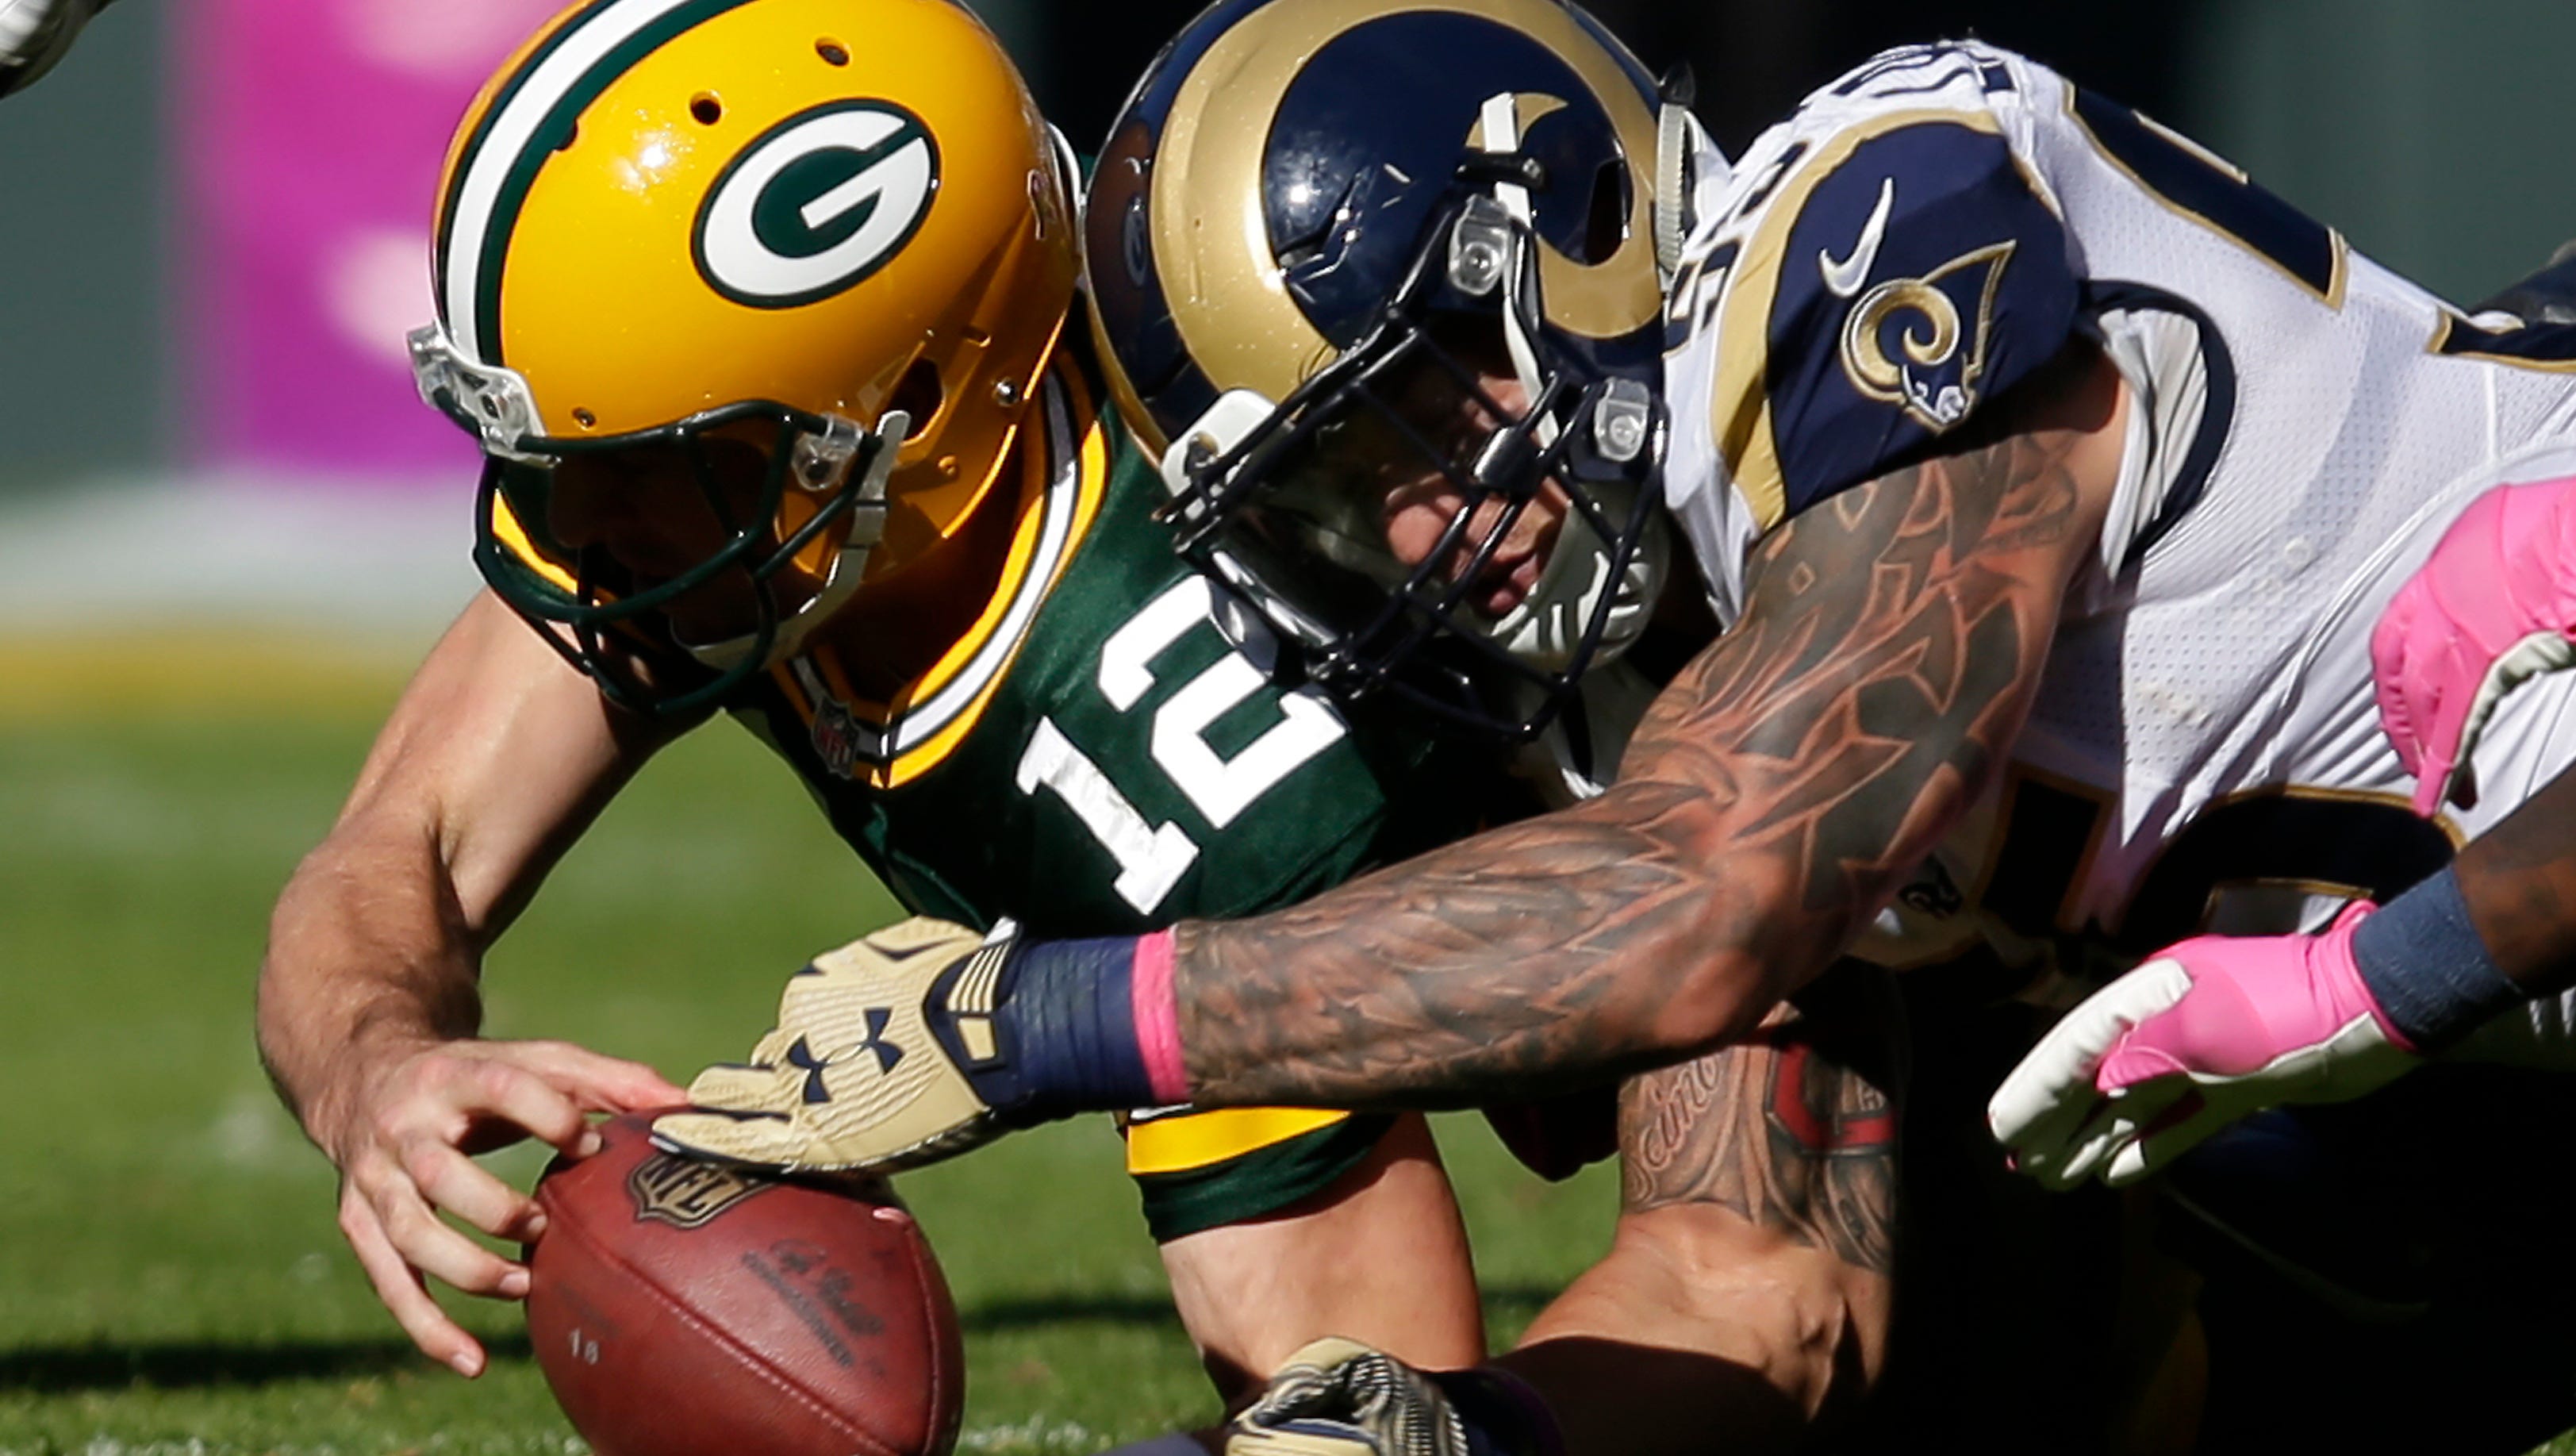 Green Bay Packers quarterback Aaron Rodgers fumbles the ball against the St. Louis Rams.